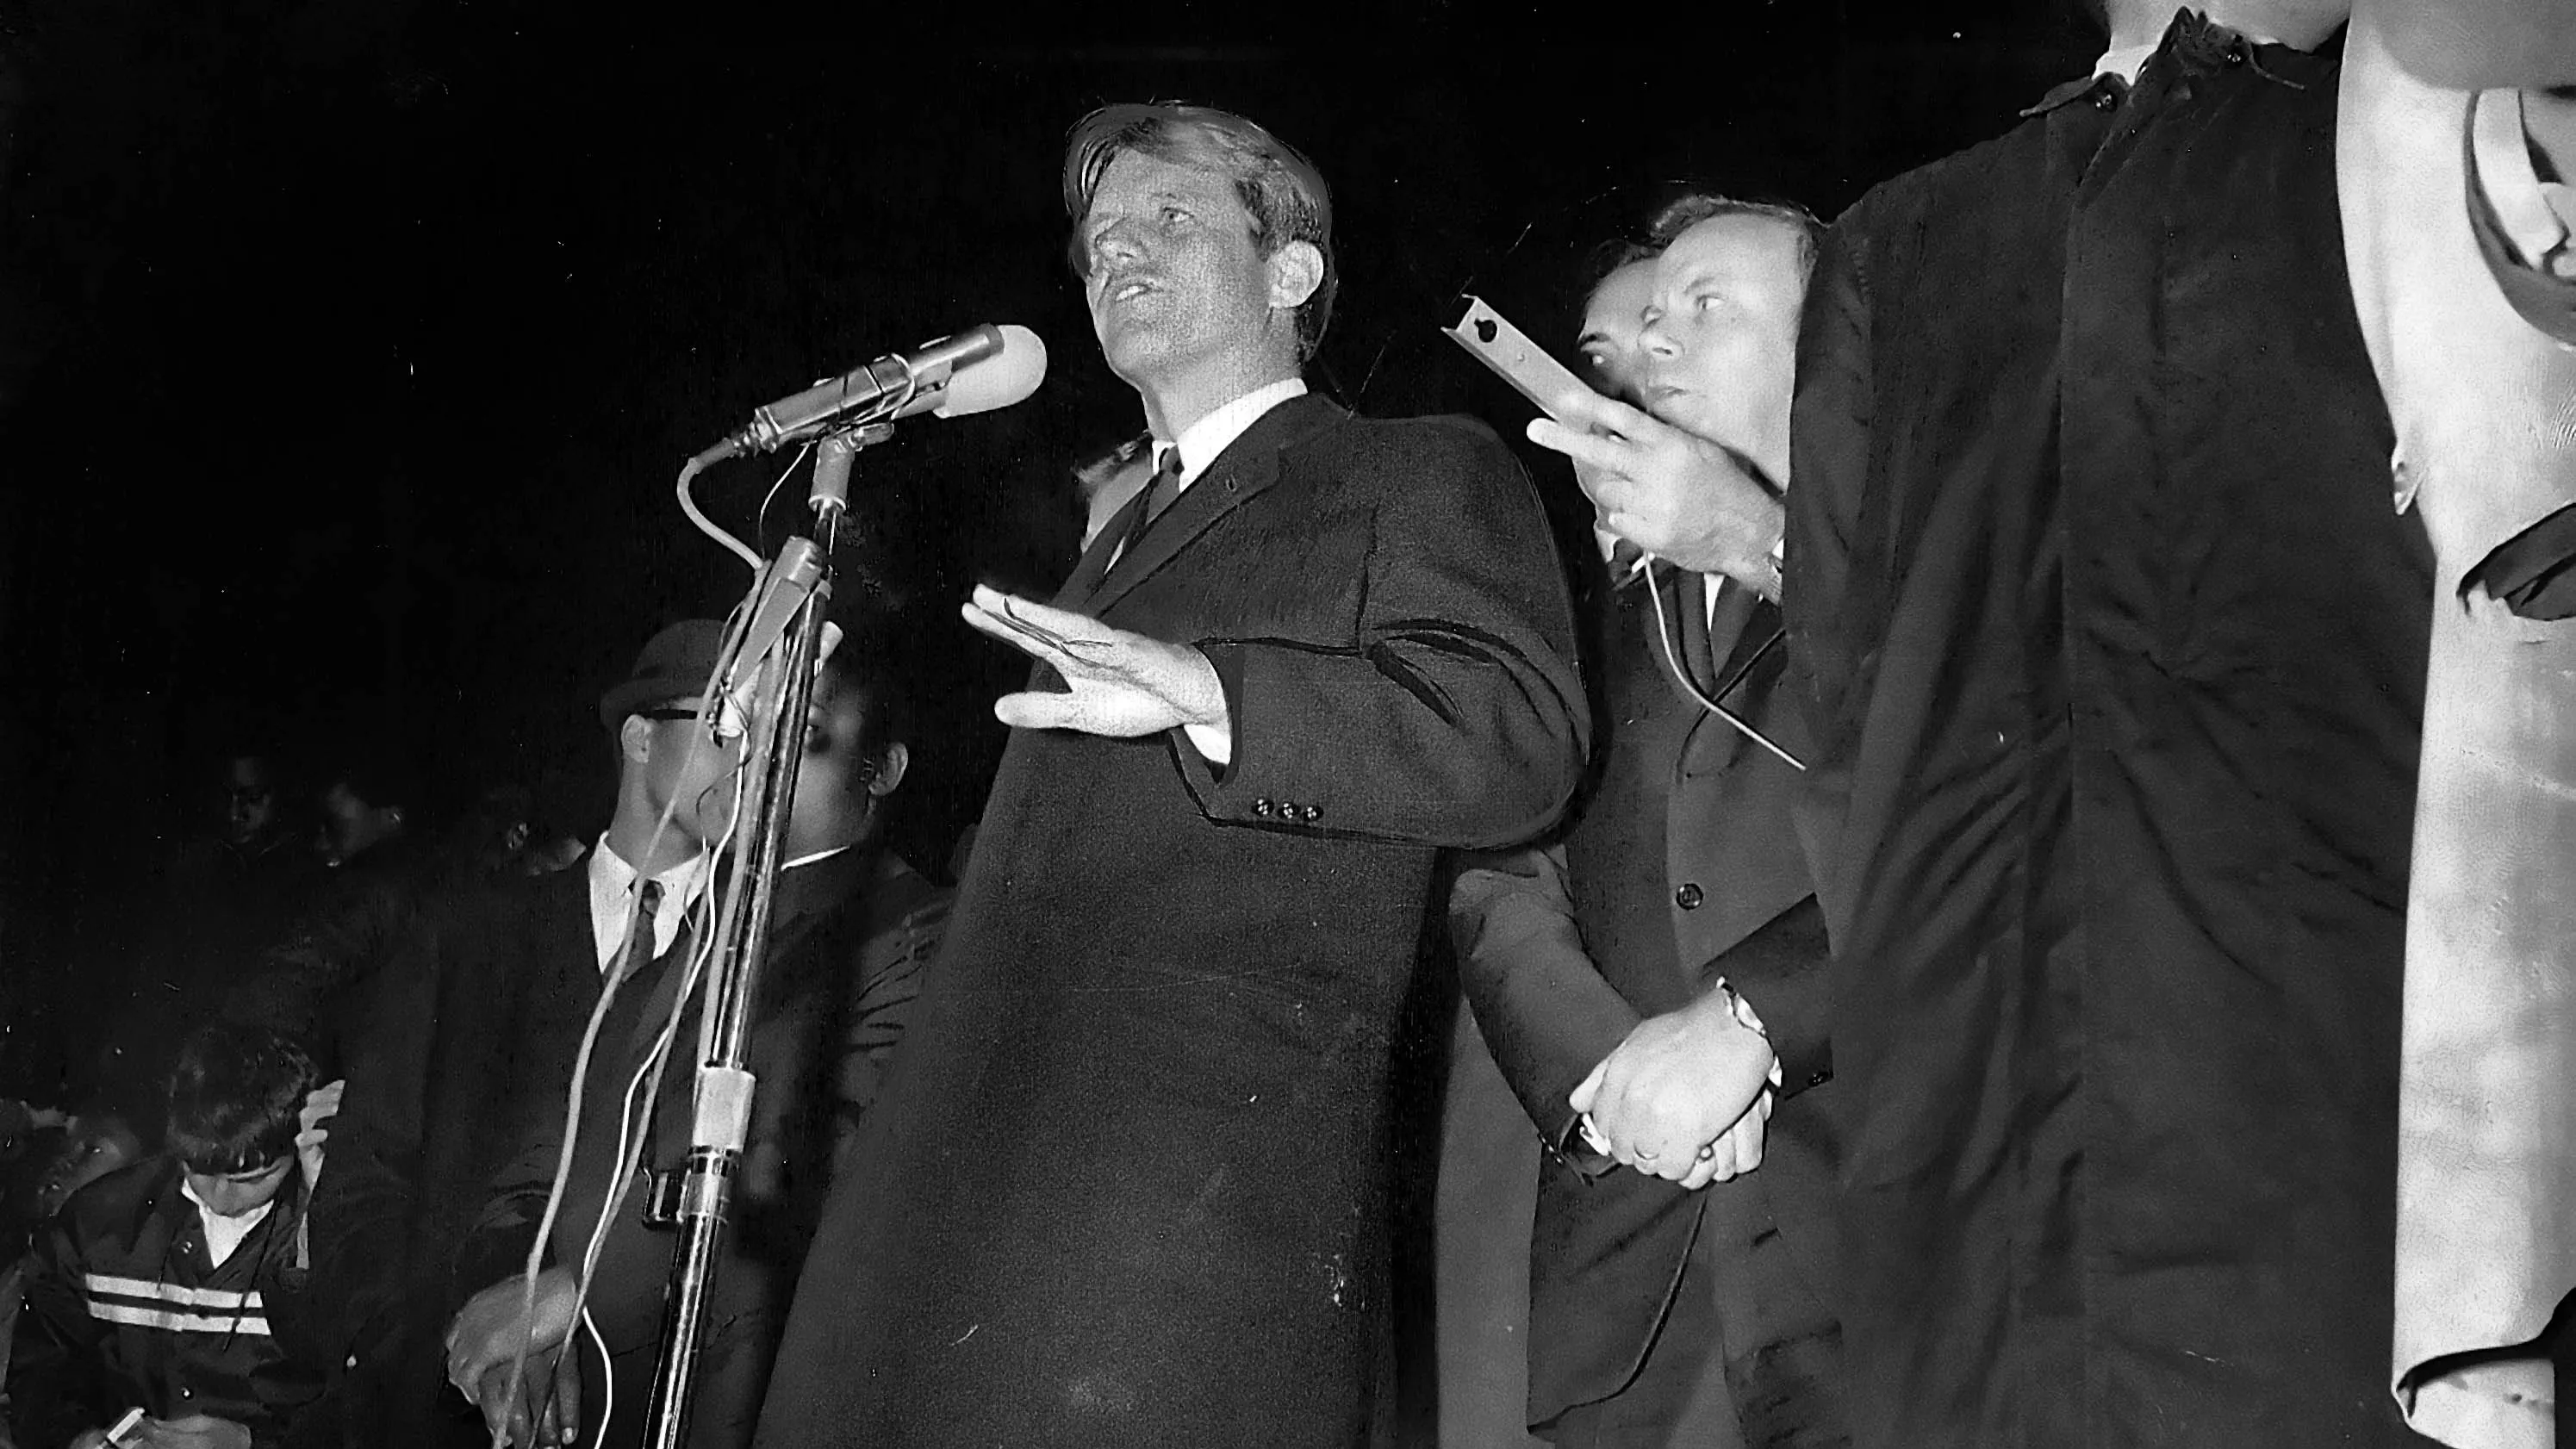 Robert F. Kennedy's speech on the death of MLK was a moving call for unity and action. Check out our “On the Death of Martin Luther King" speech summary, text, and analysis.